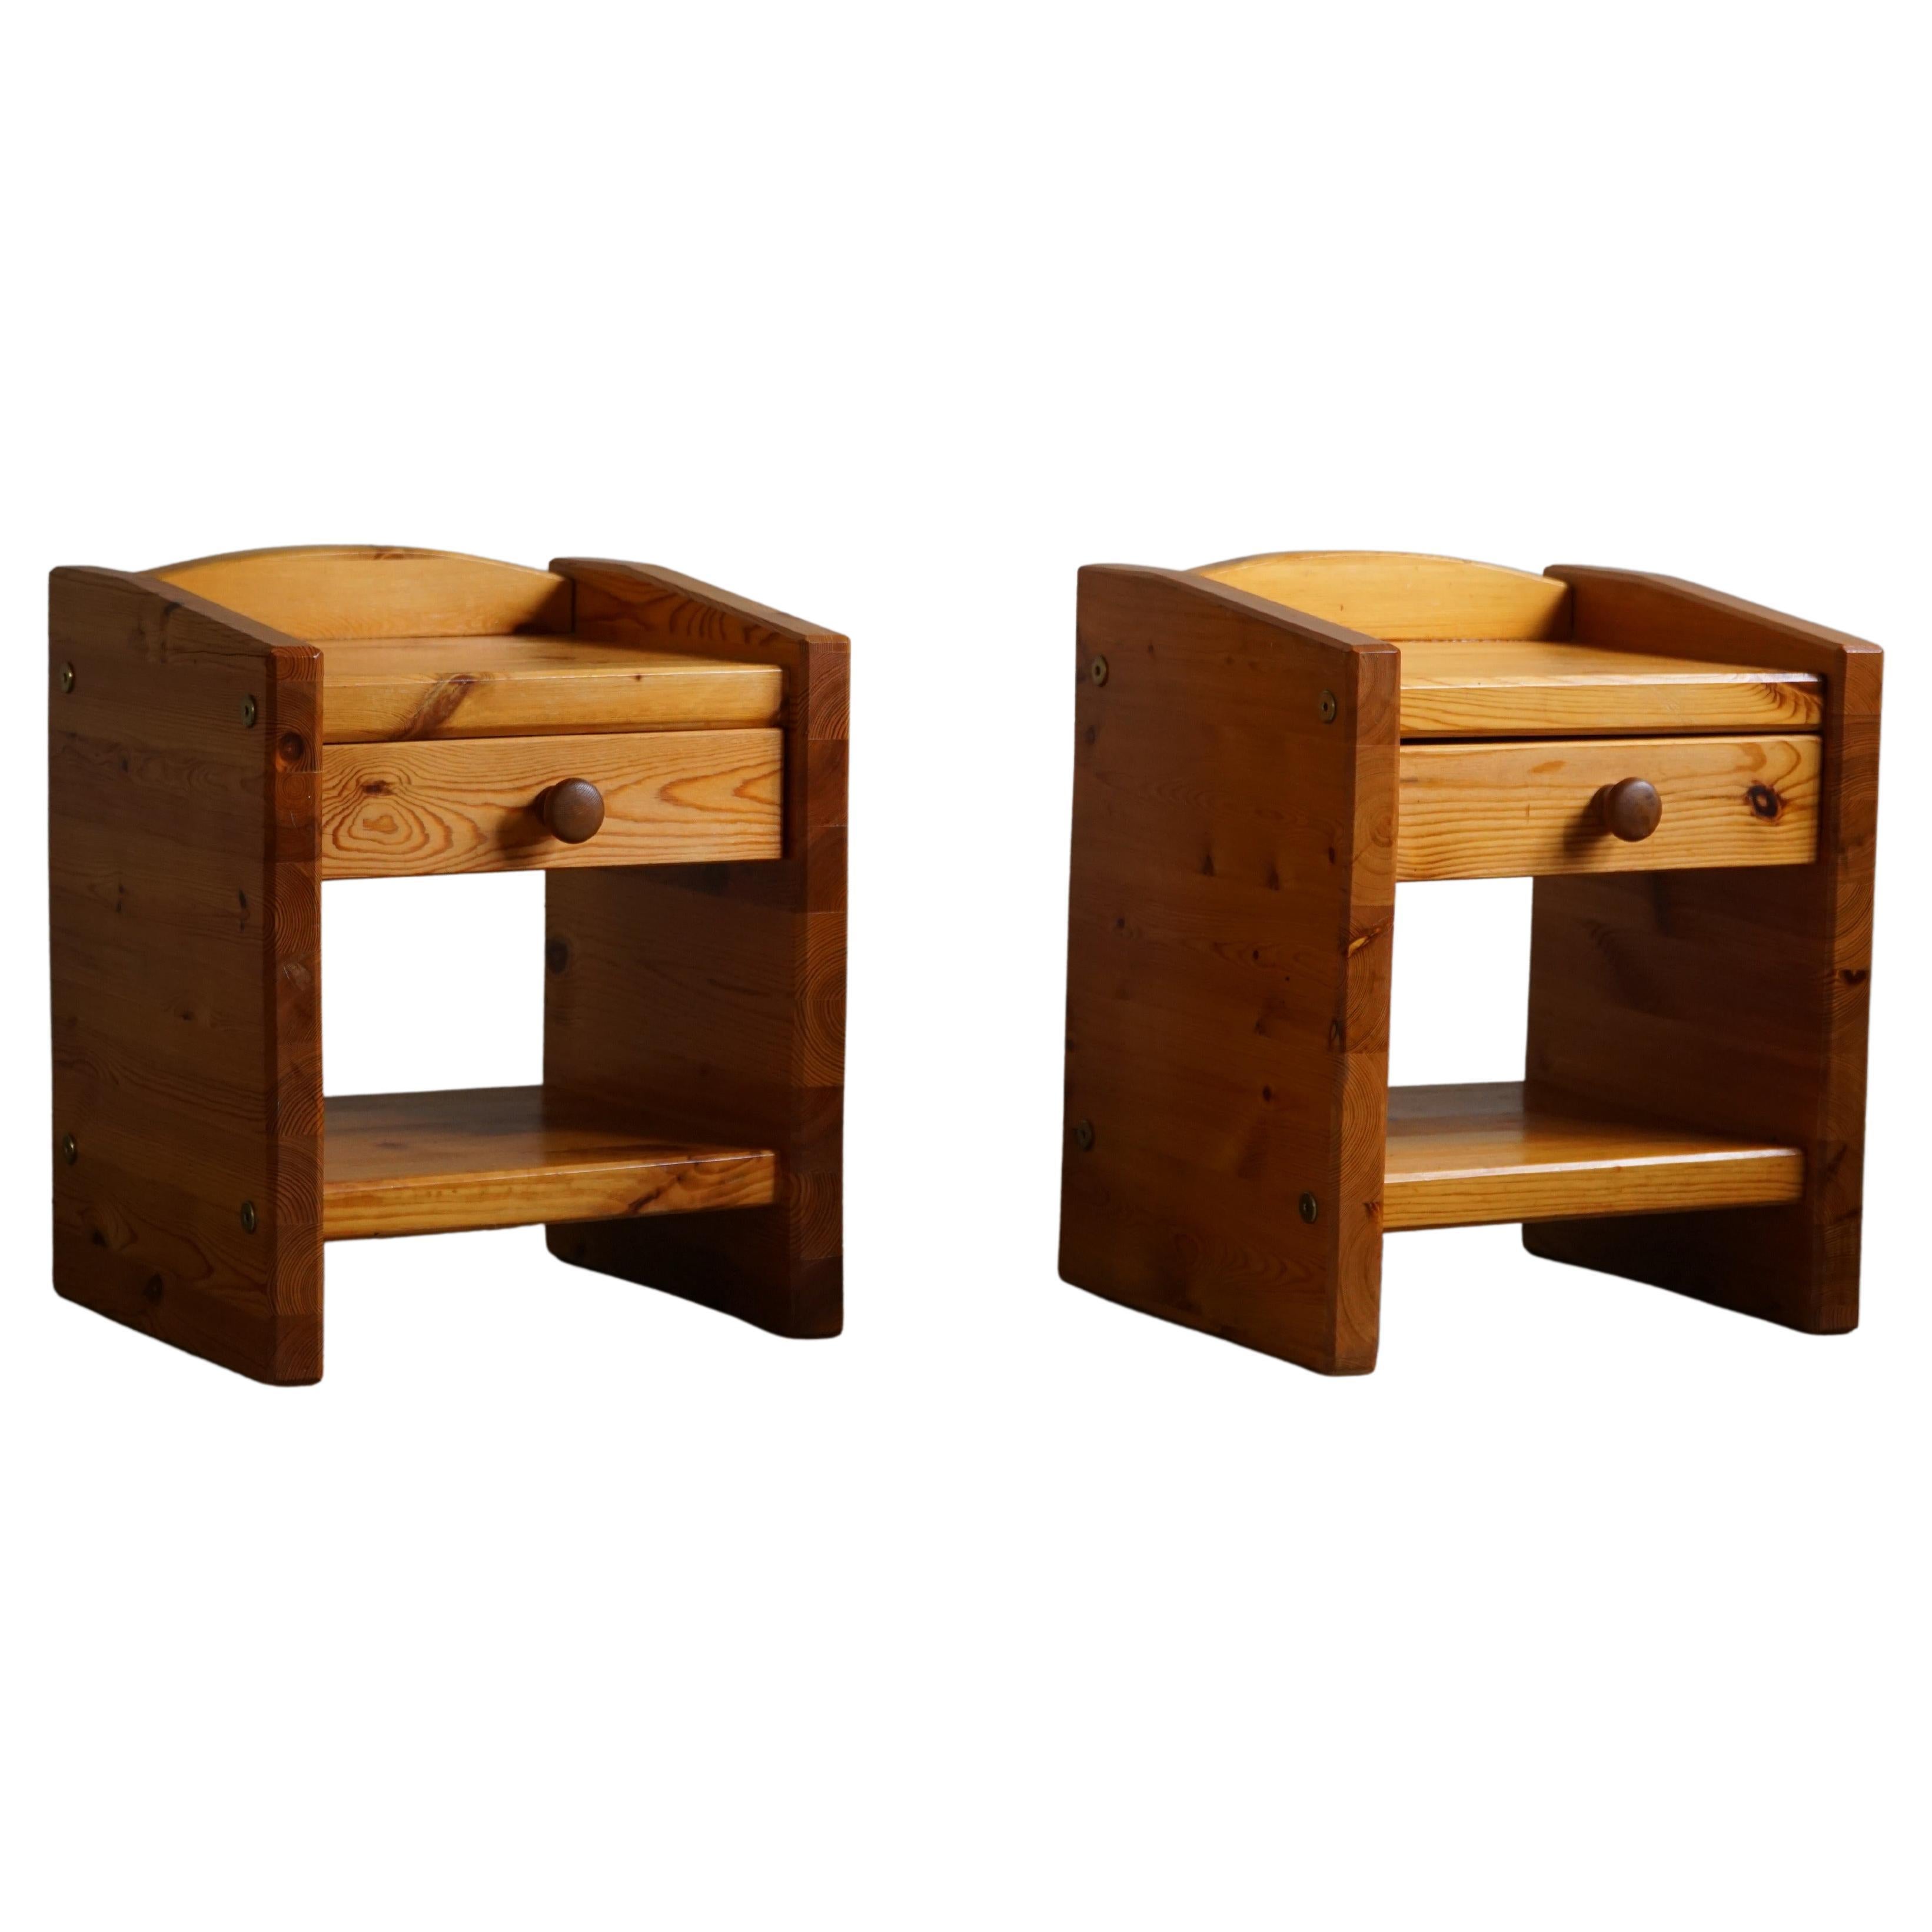 20th Midcentury, Pair of Brutalist Night Stands in Solid Pine, Denmark, 1970s For Sale